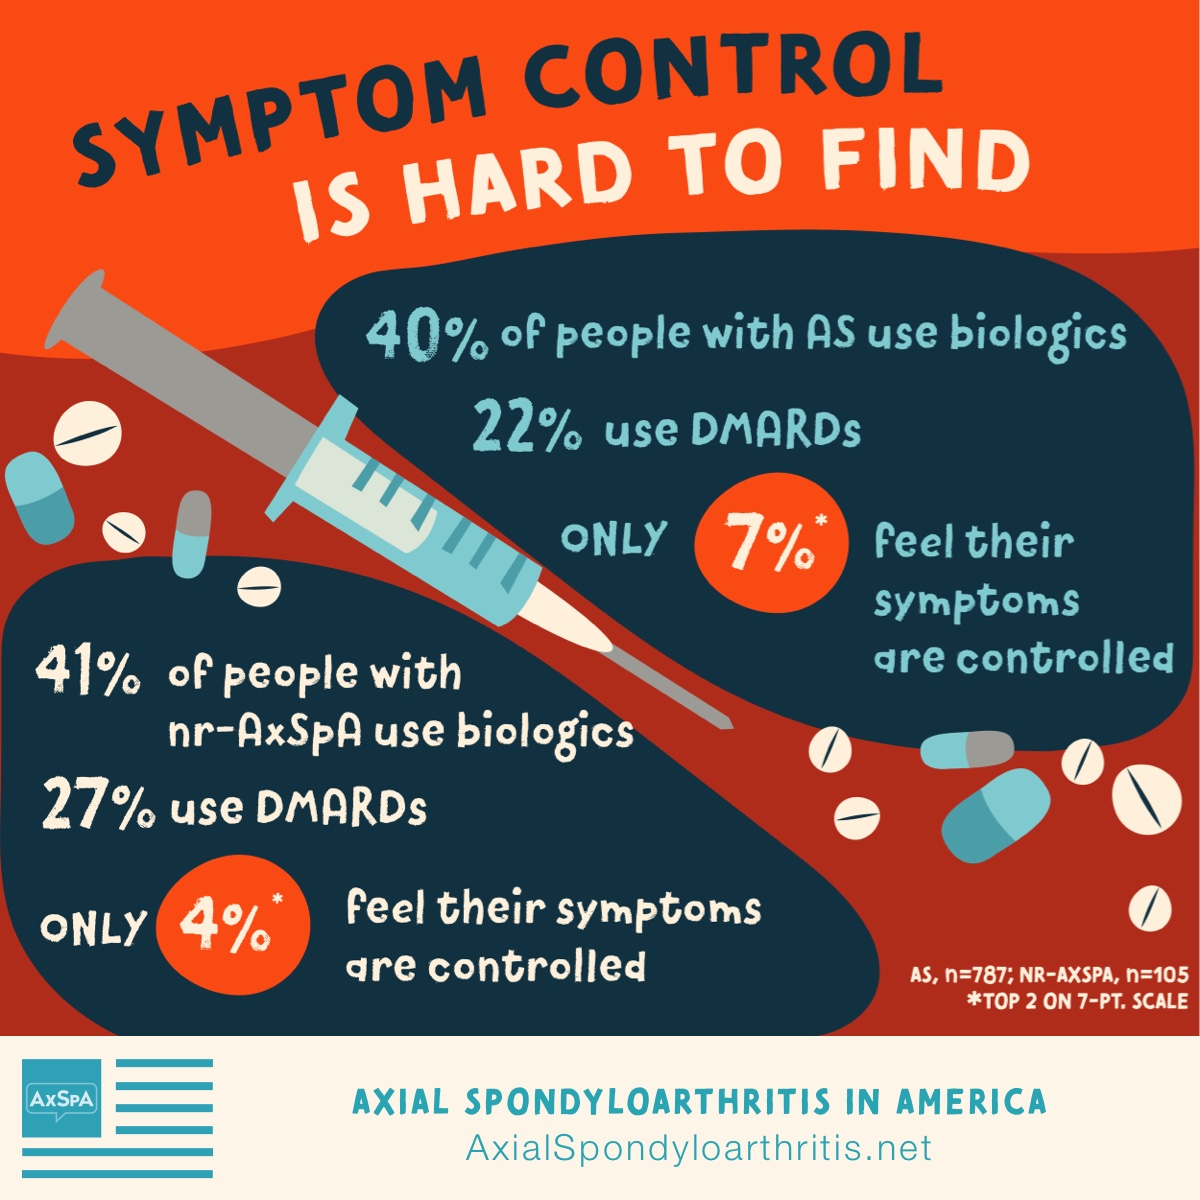 Of those with non-radiographic axial spondyloarthritis, only 4% feel their symptoms are controlled, and of those with AS, only 7% feel symptoms are controlled.